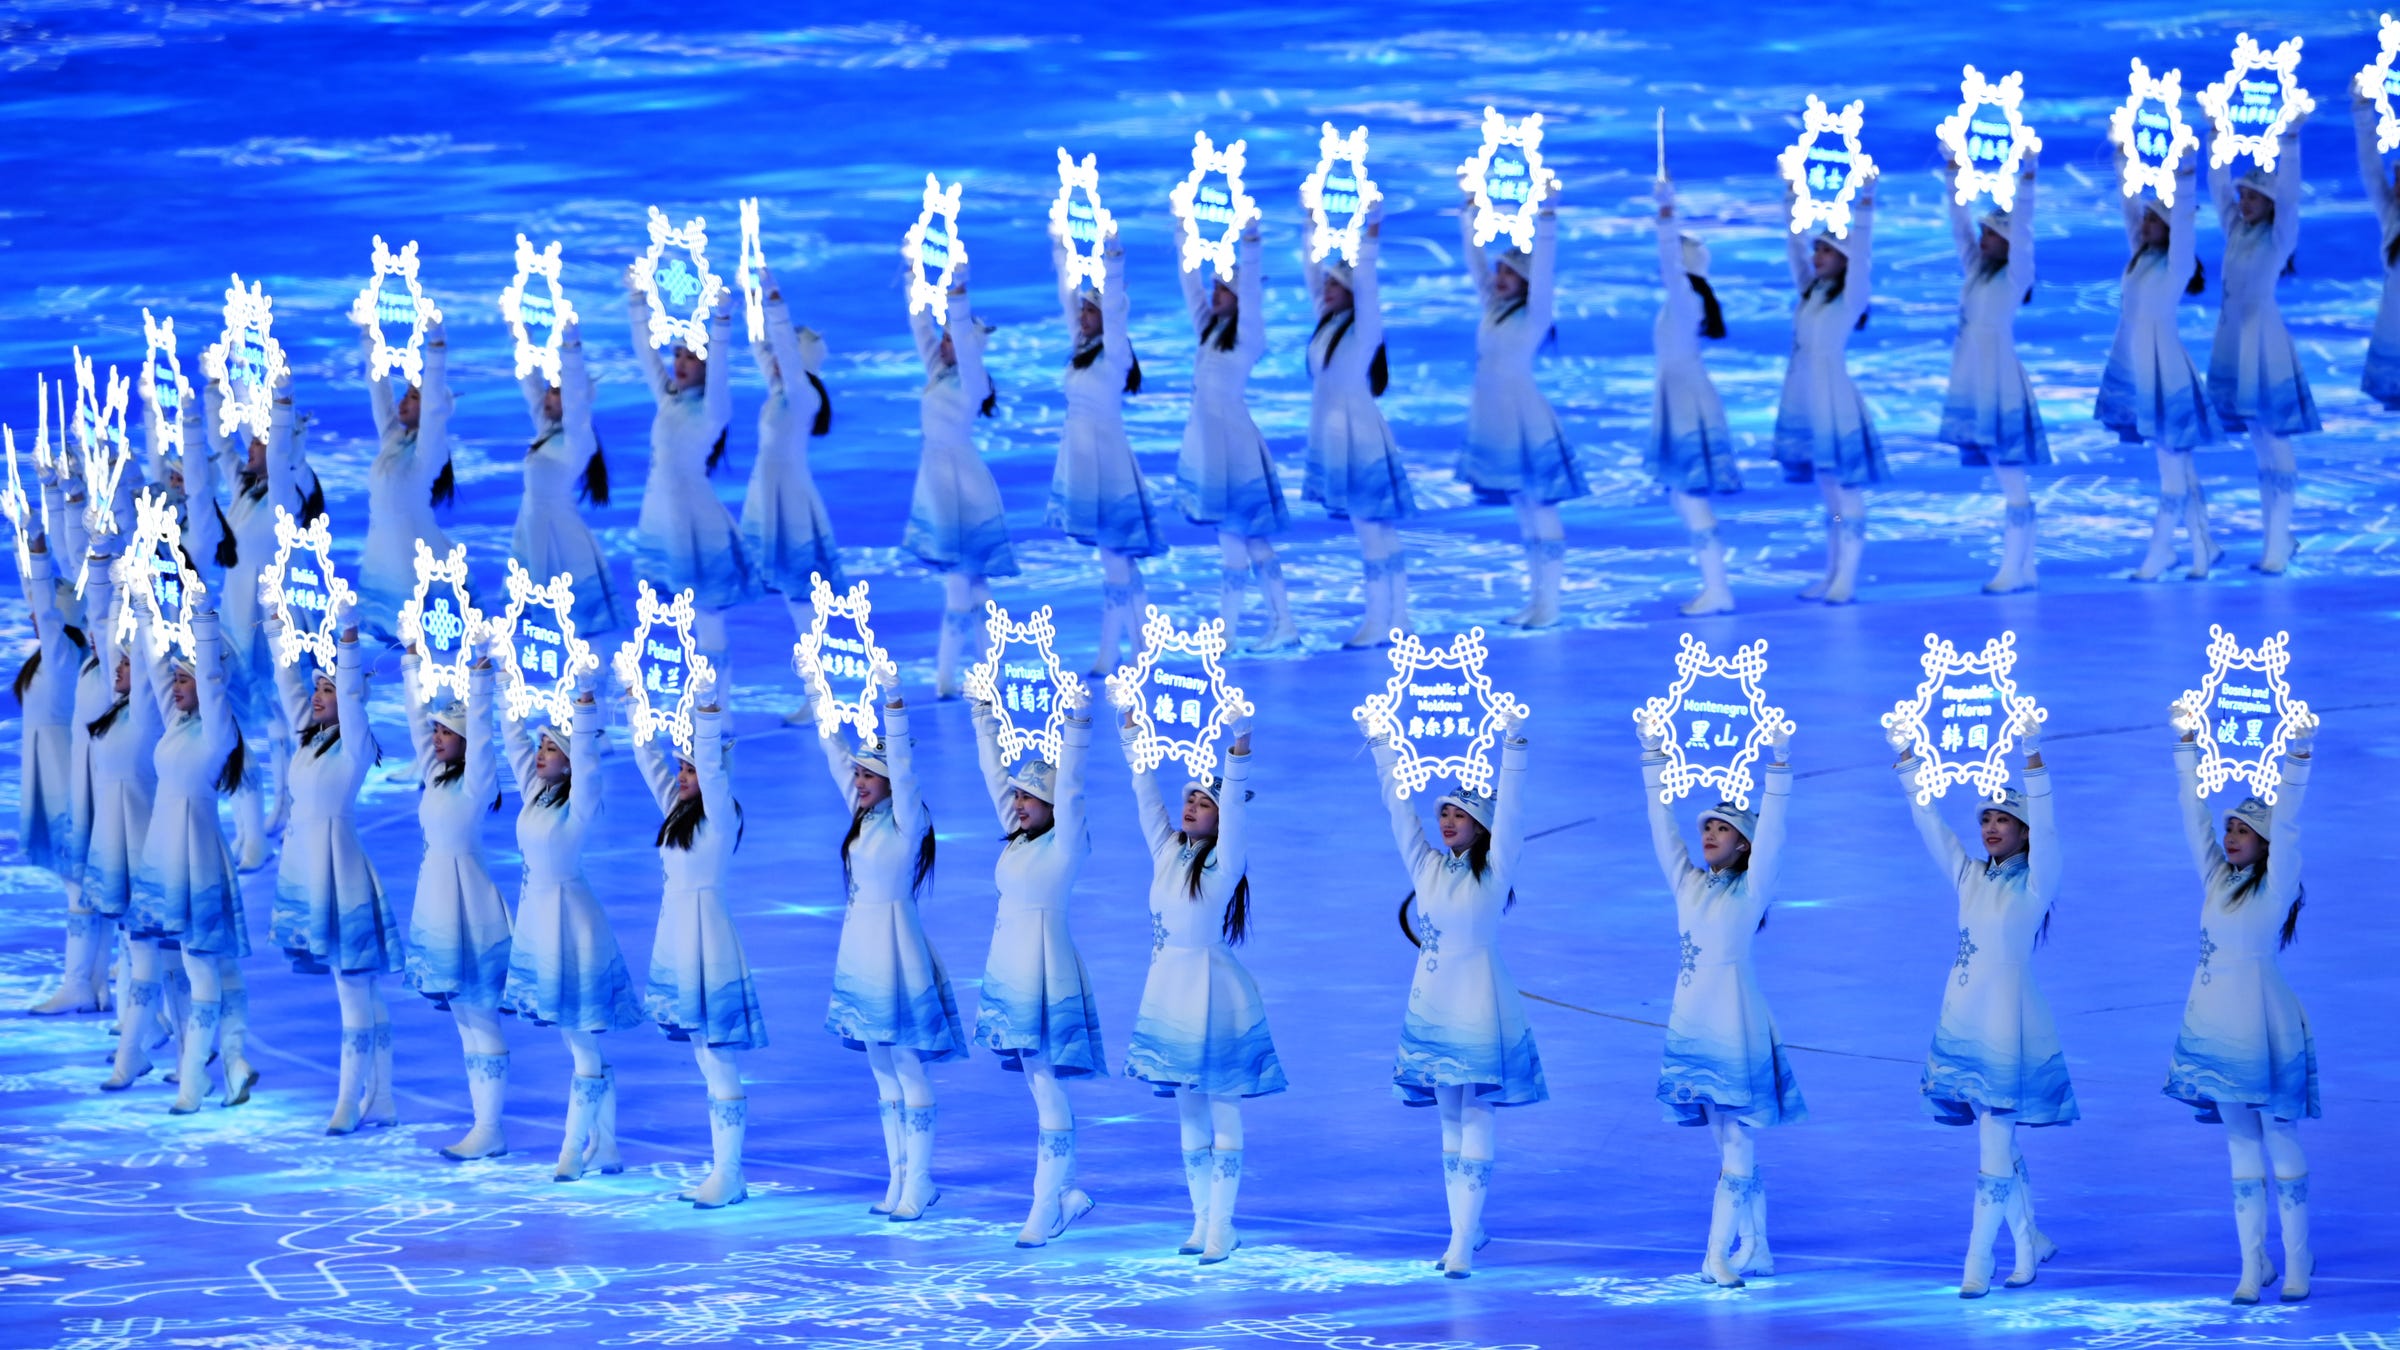 Photos of the opening ceremony at Beijing 2022 Winter Olympic Games